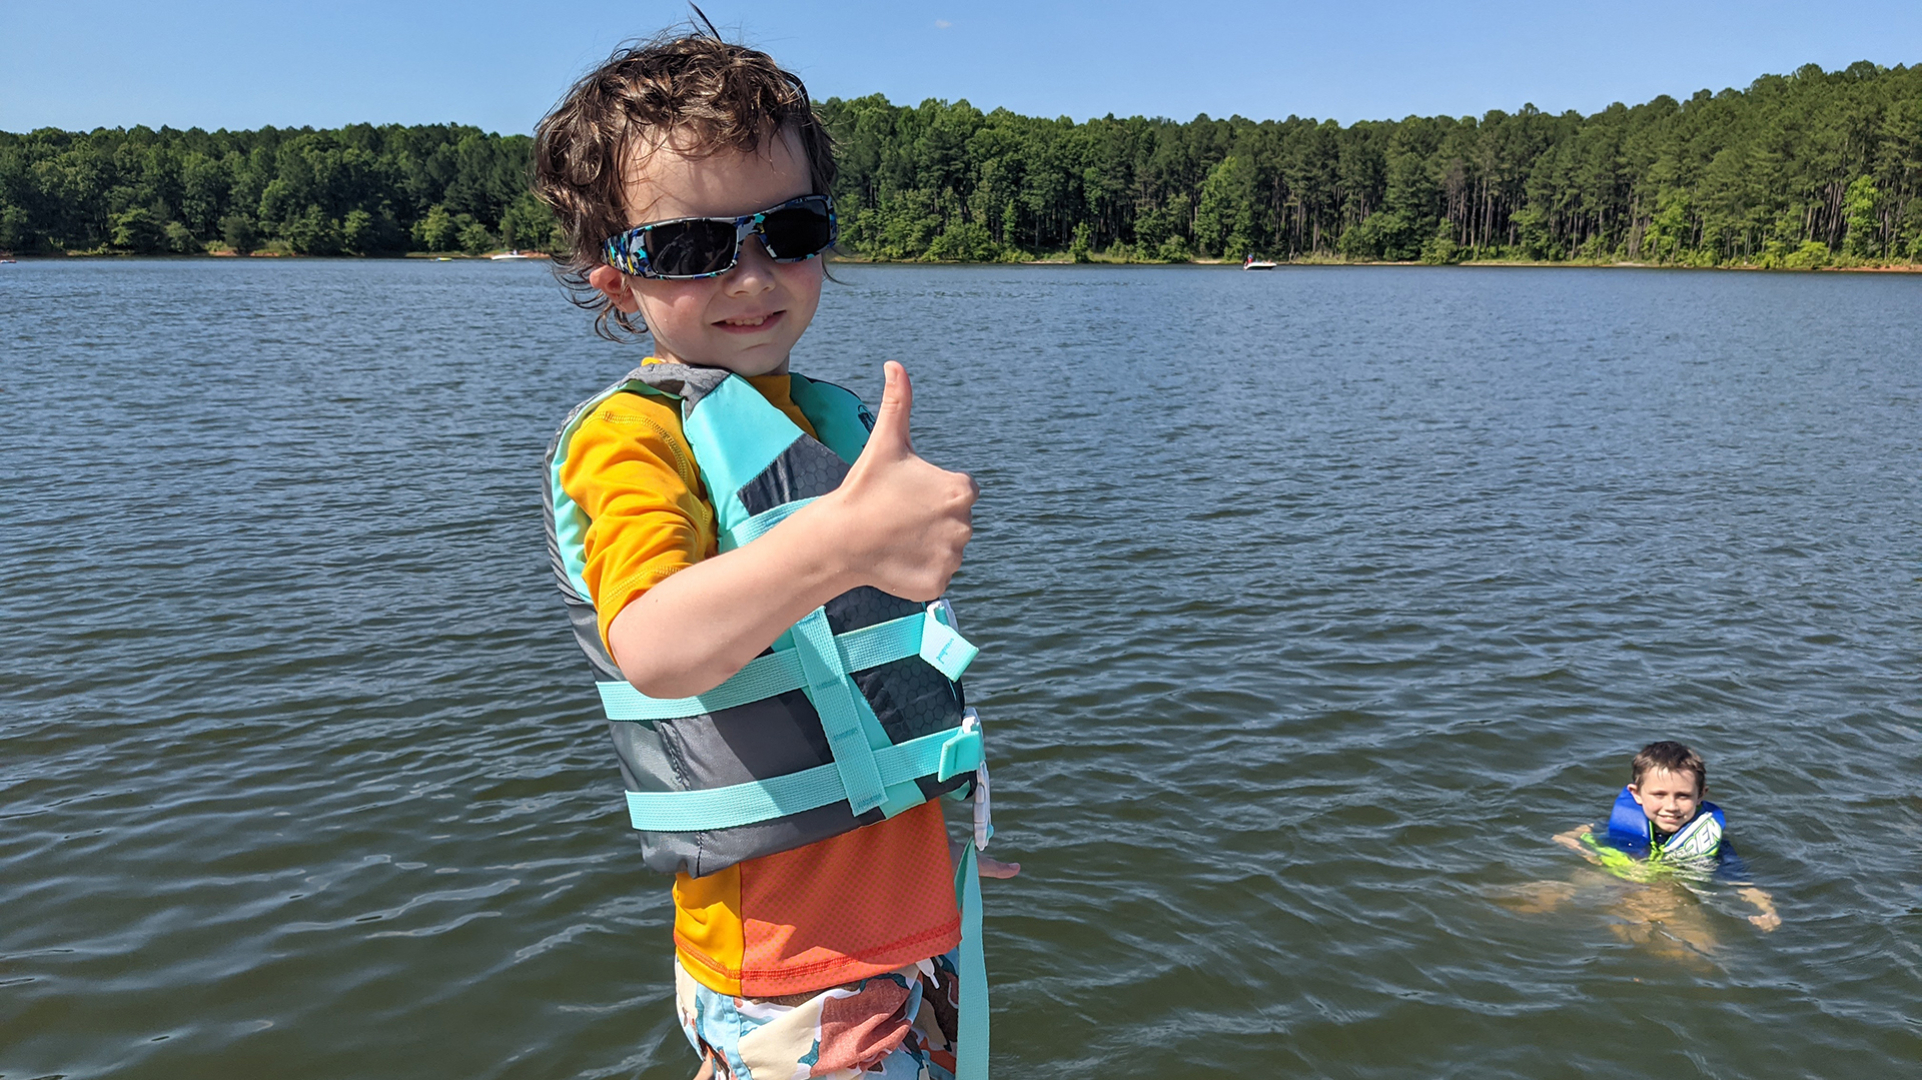 Thumbs up for good times!